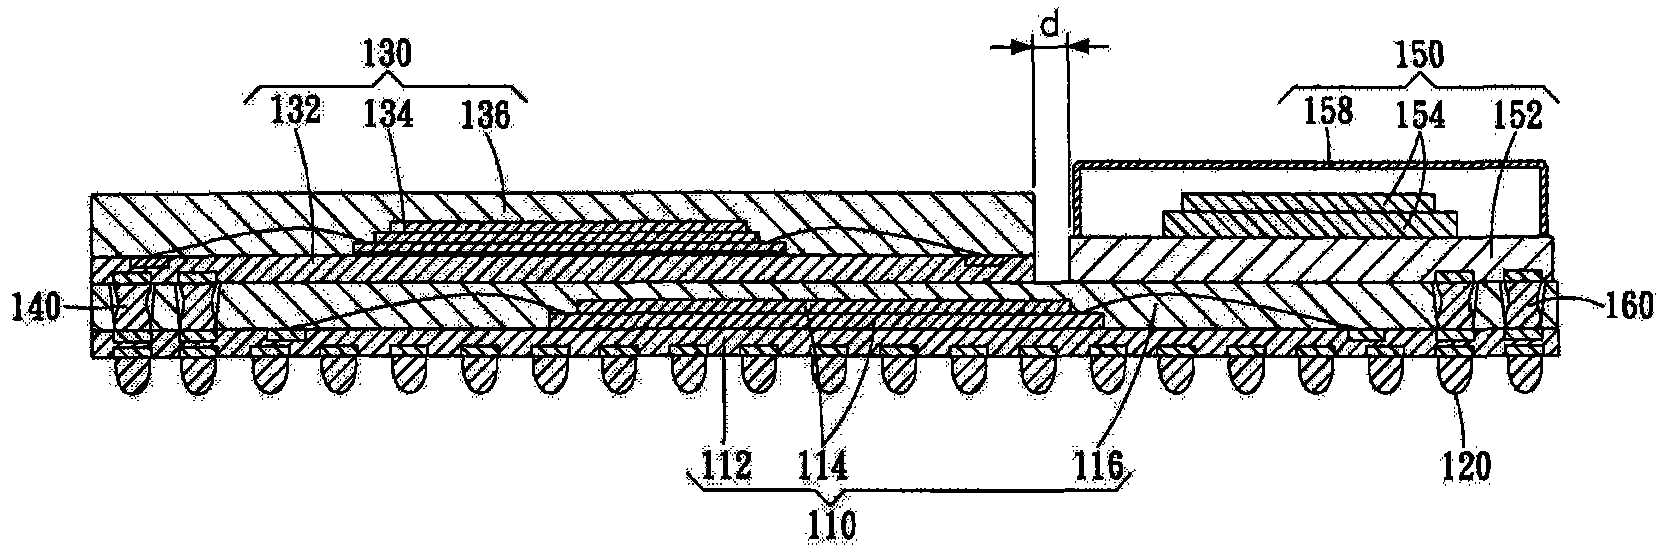 Stacking-type semiconductor package structure